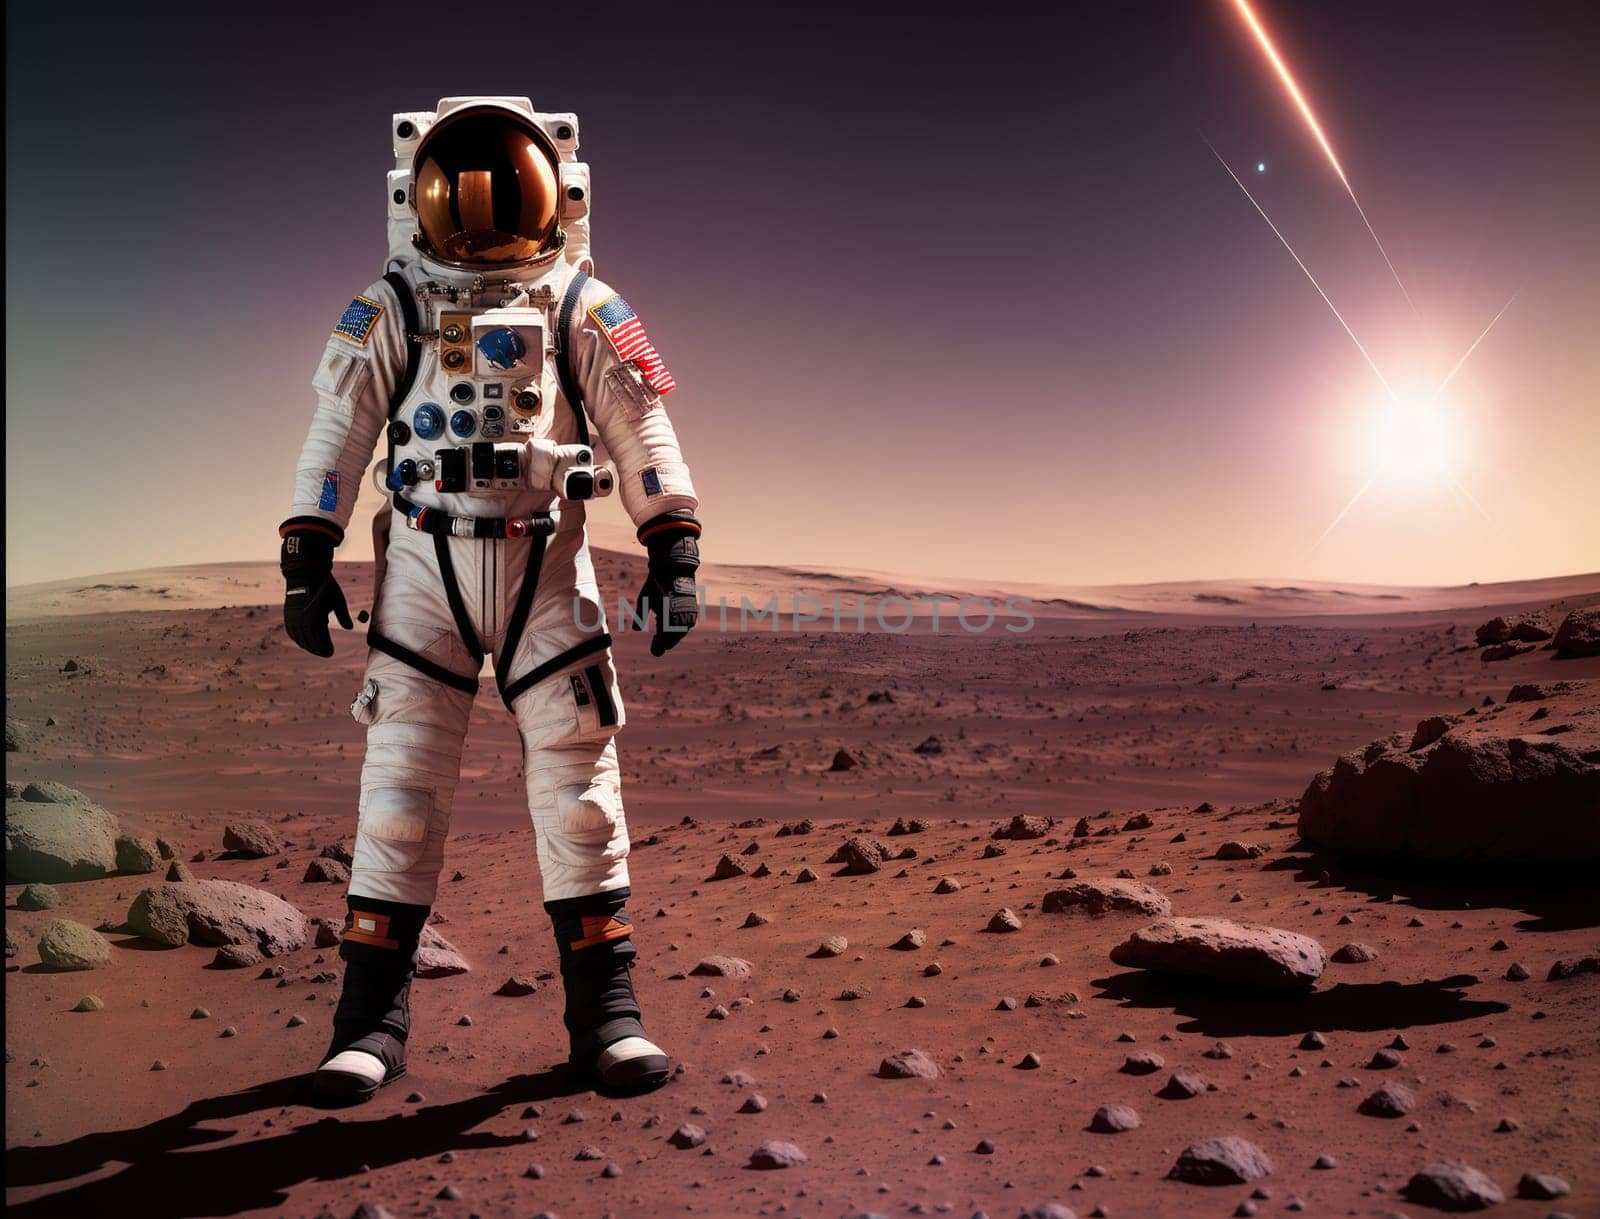 The image shows an astronaut standing on the surface of Mars, wearing a spacesuit and looking out at the horizon.